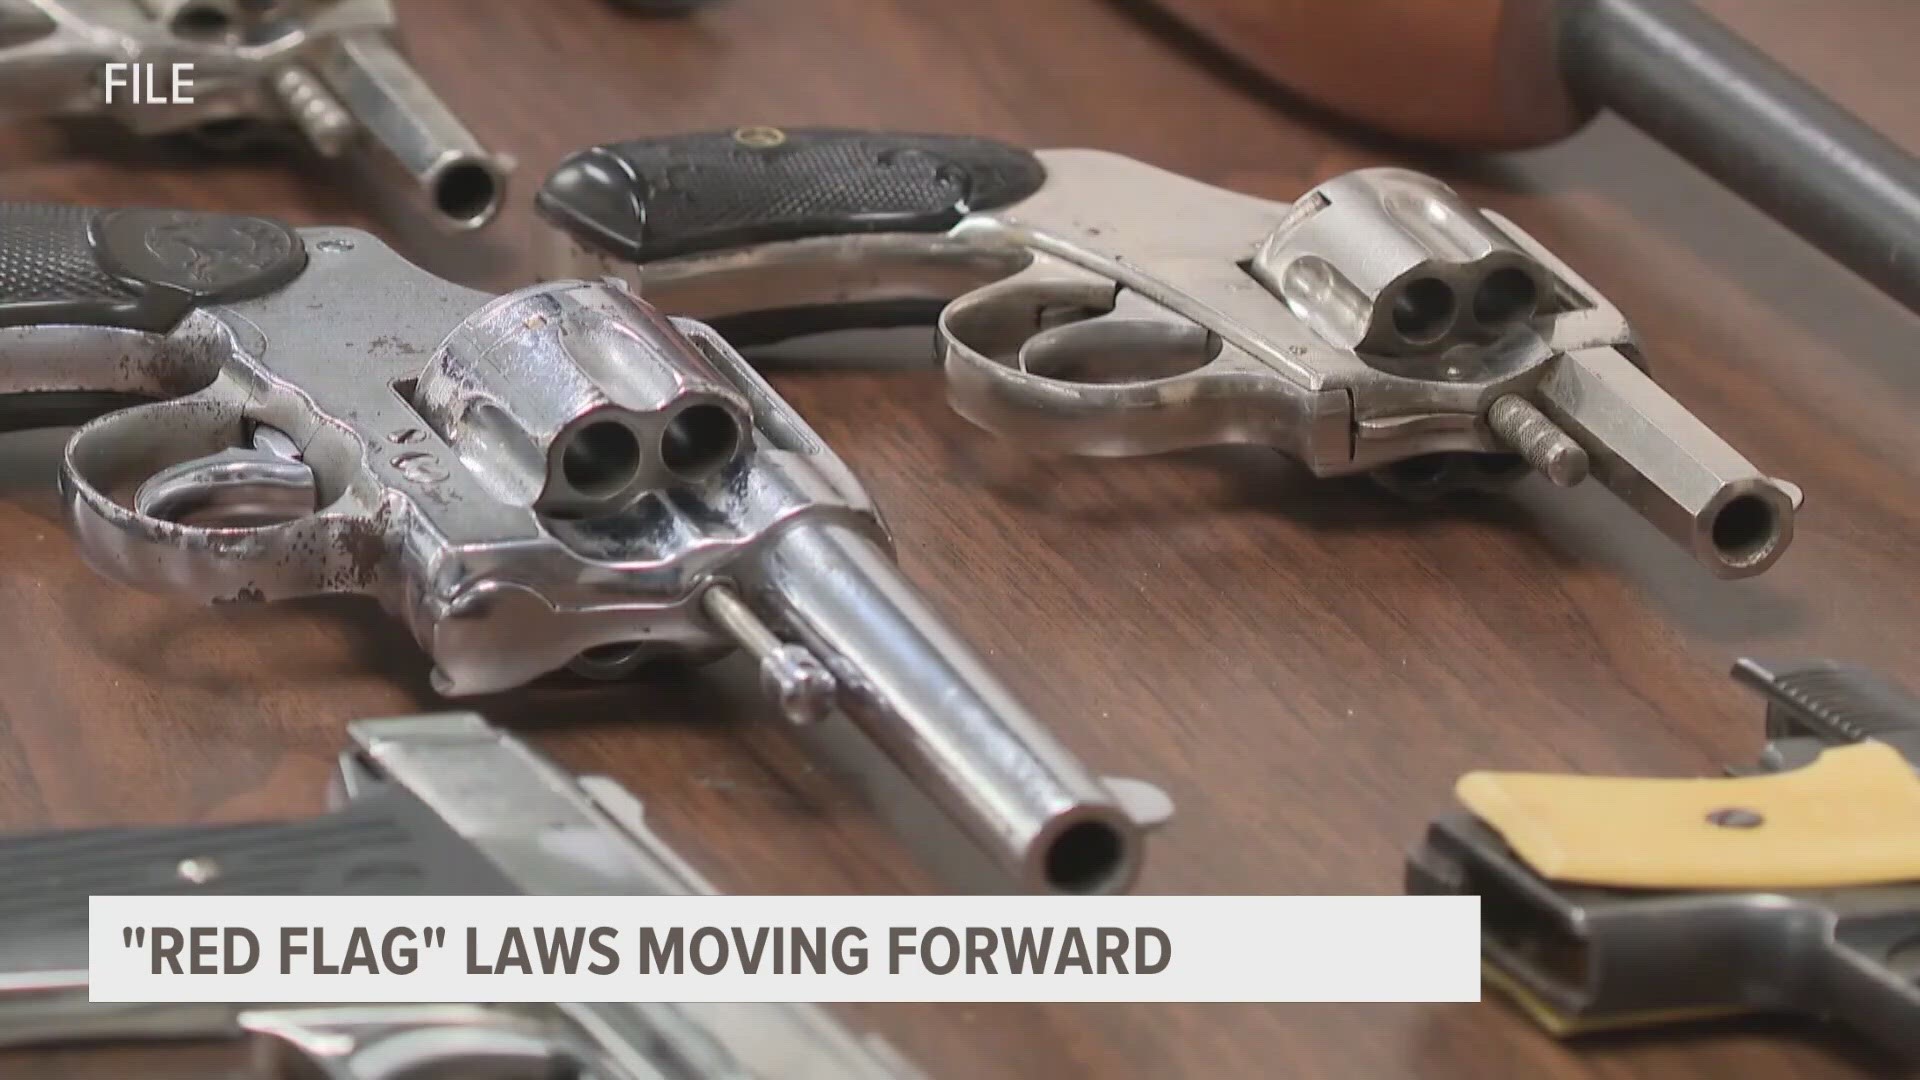 Under these laws, firearms could be temporarily taken from someone believed to be a danger to themselves or others.